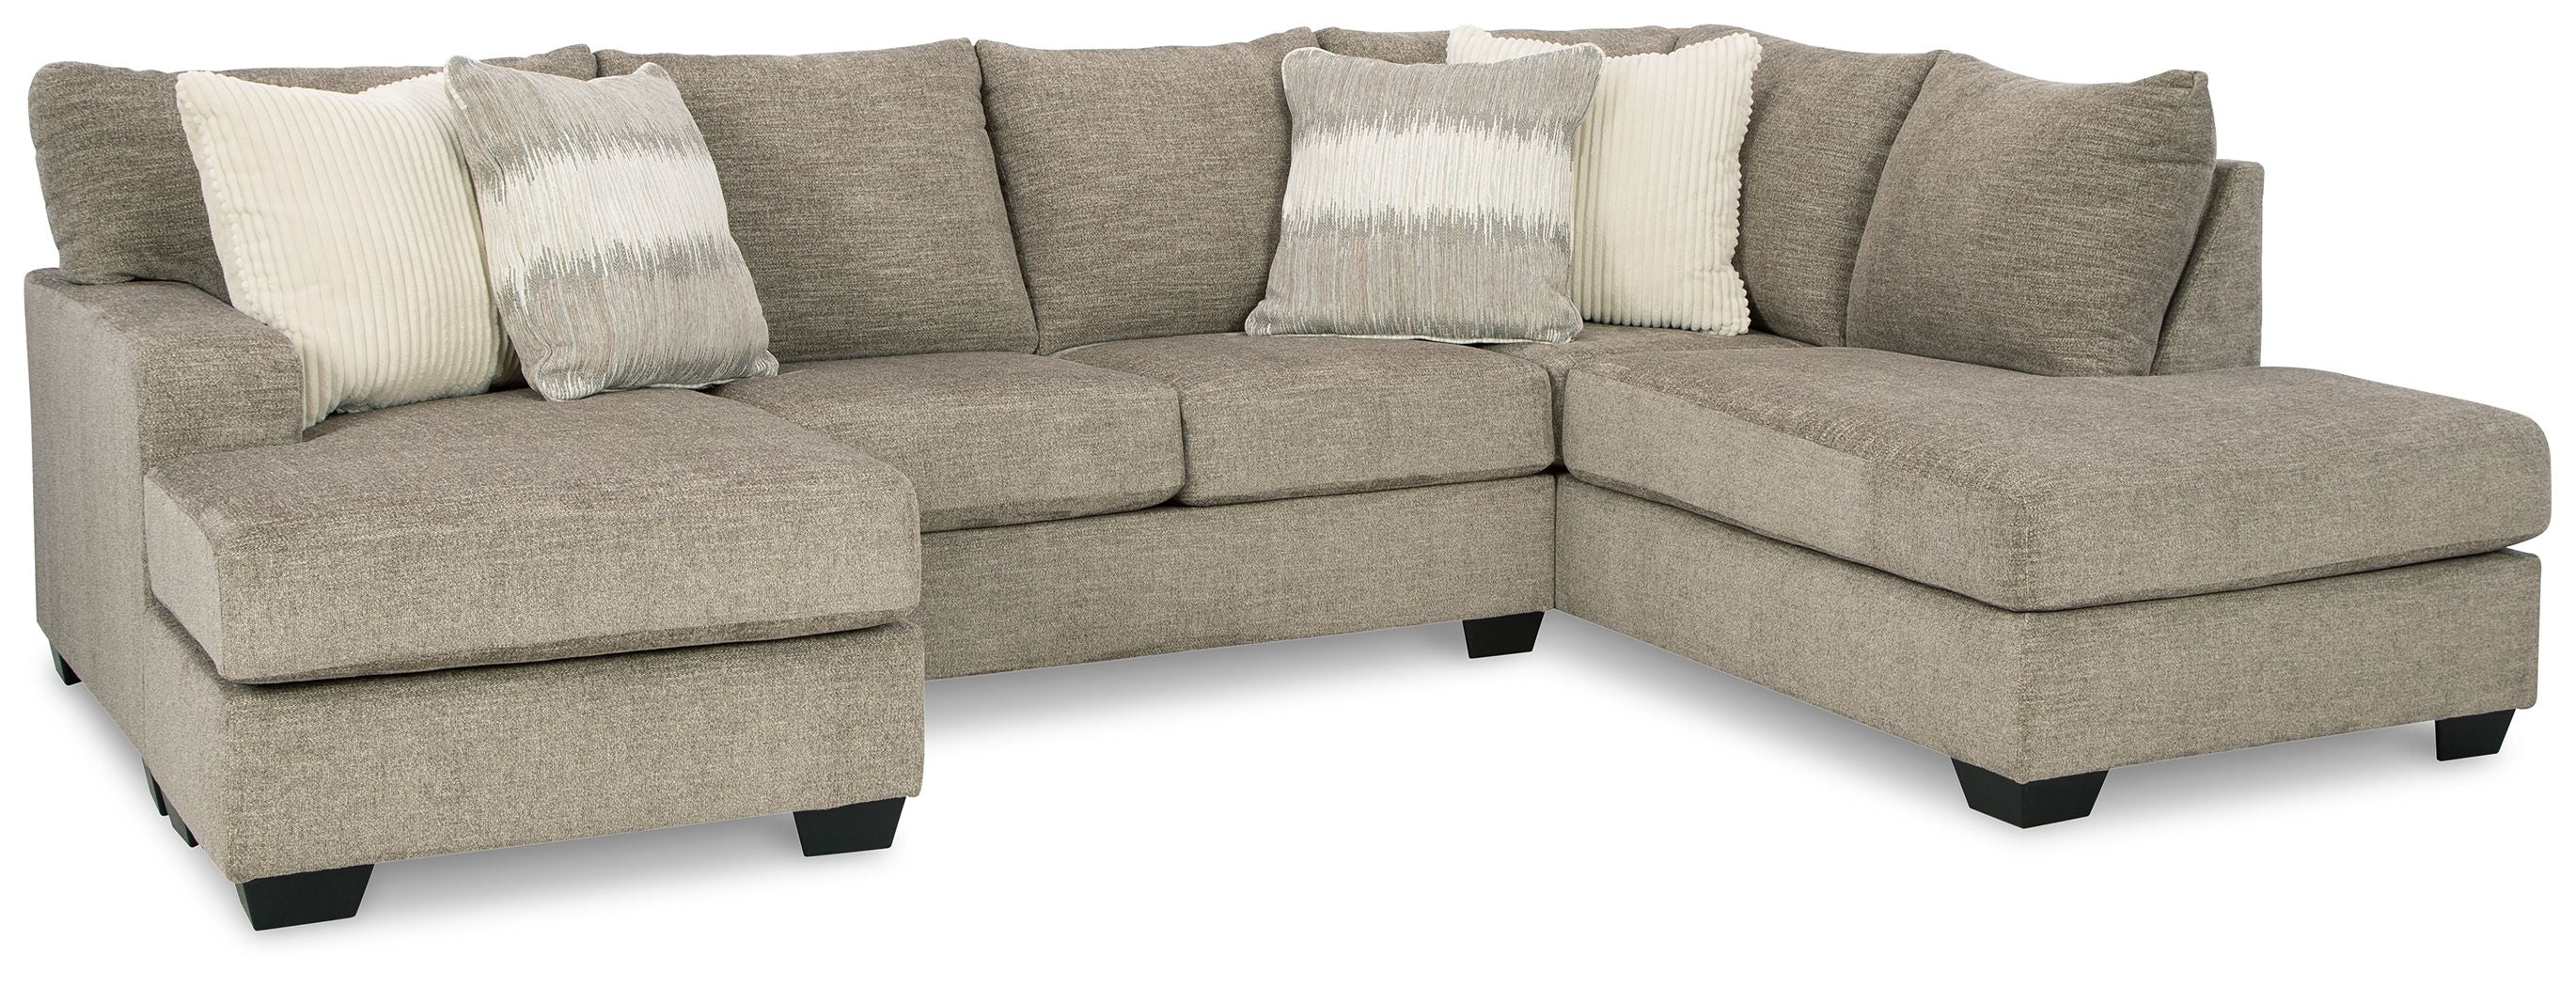 Creswell Gray Stone 2-Piece Sectional w/ Chaise